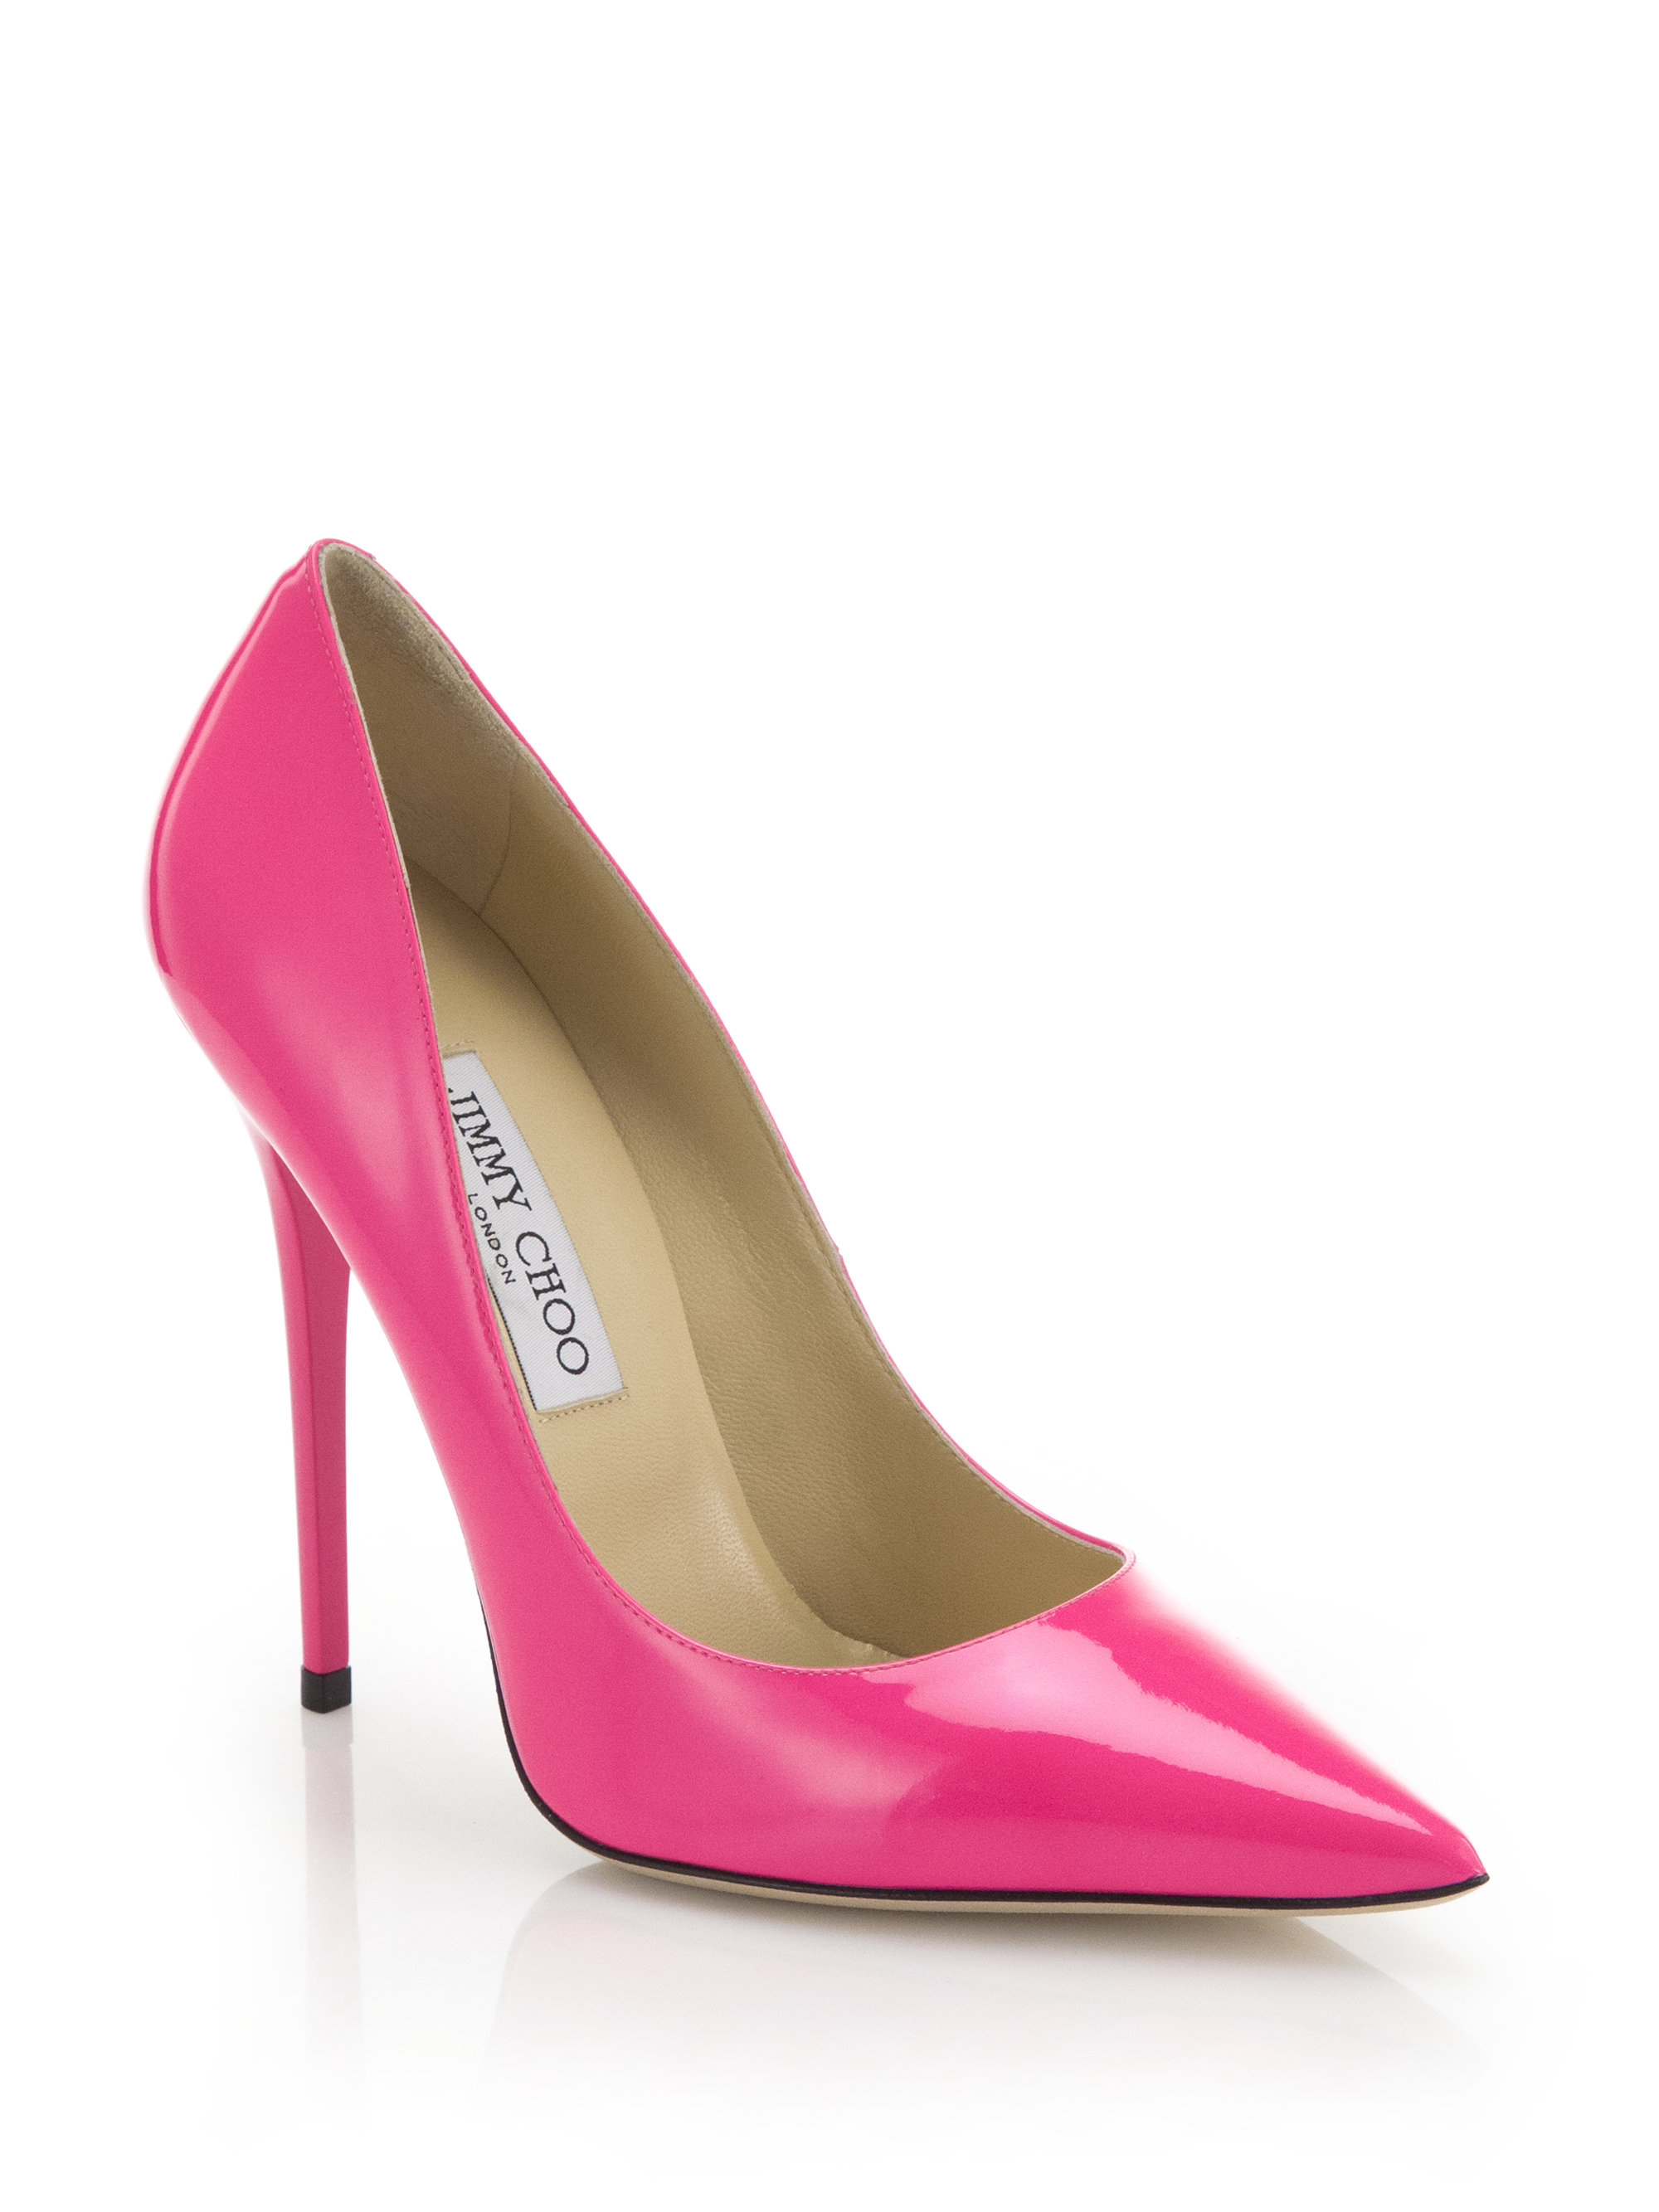 Lyst - Jimmy Choo Anouk Patent Leather Pumps in Pink